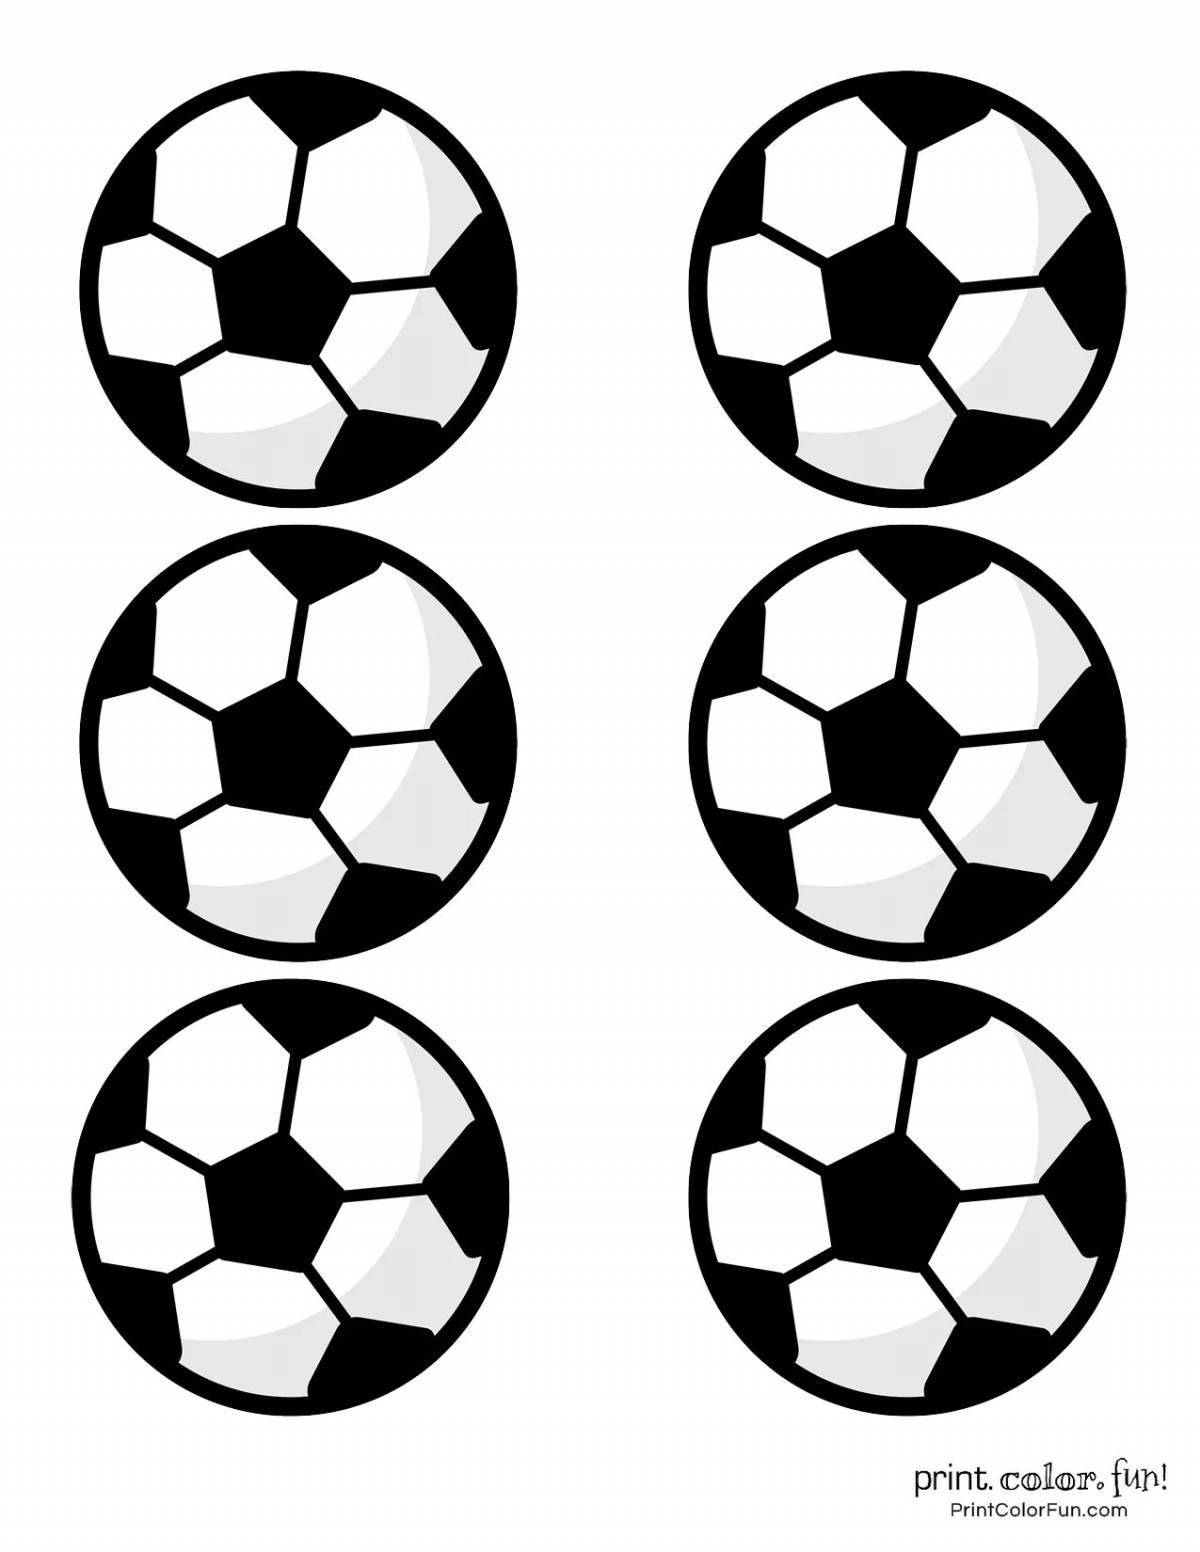 An entertaining coloring book of a soccer ball for children